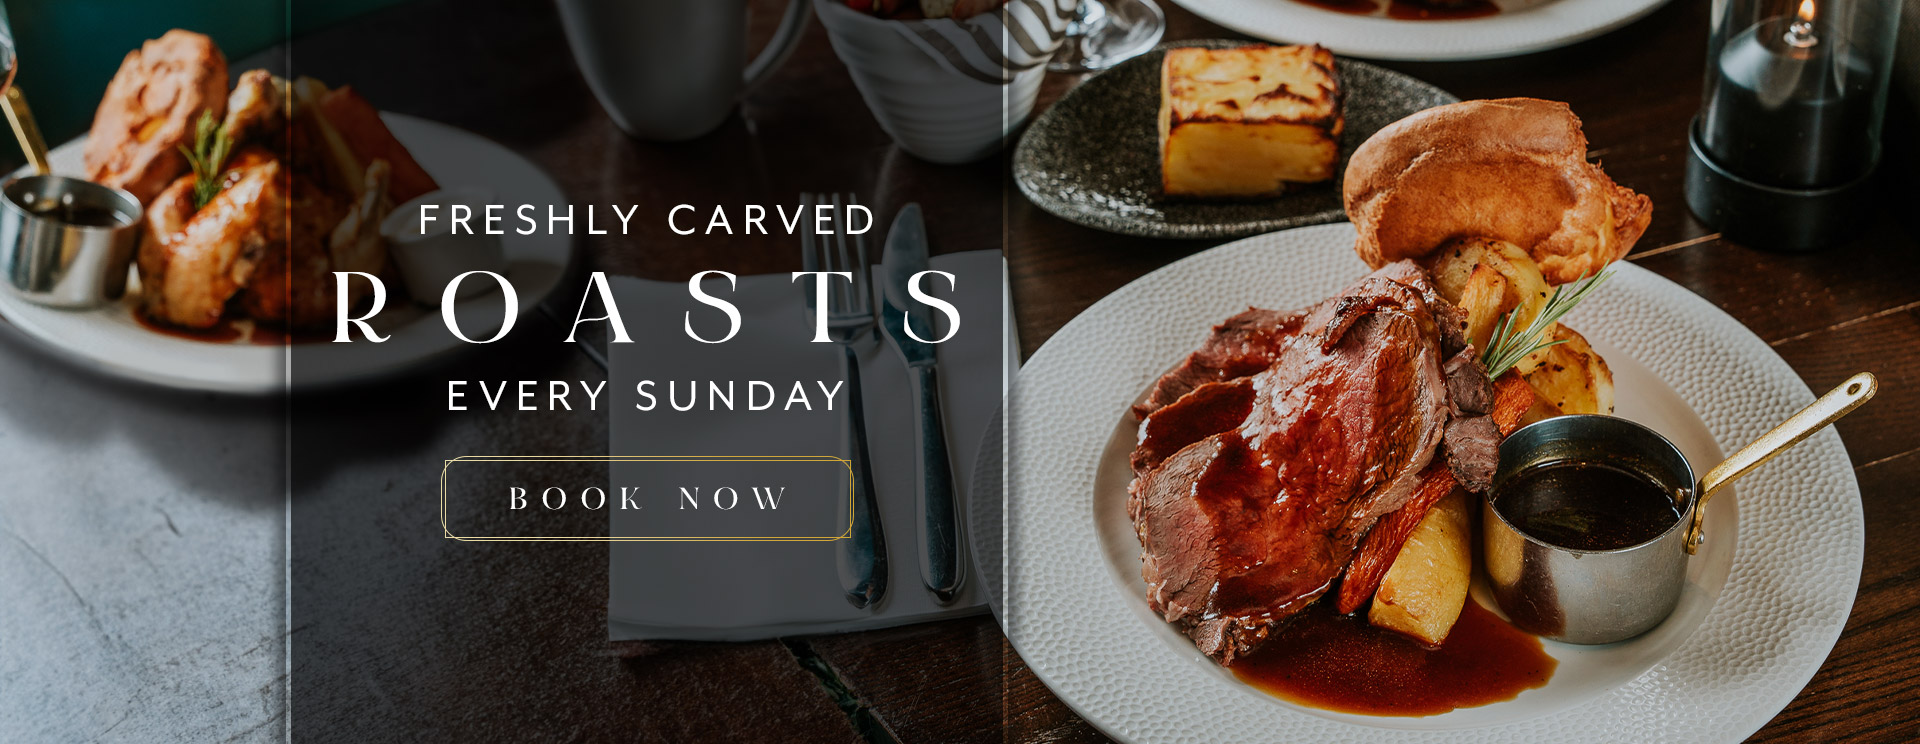 Sunday Lunch at The Belvedere Arms